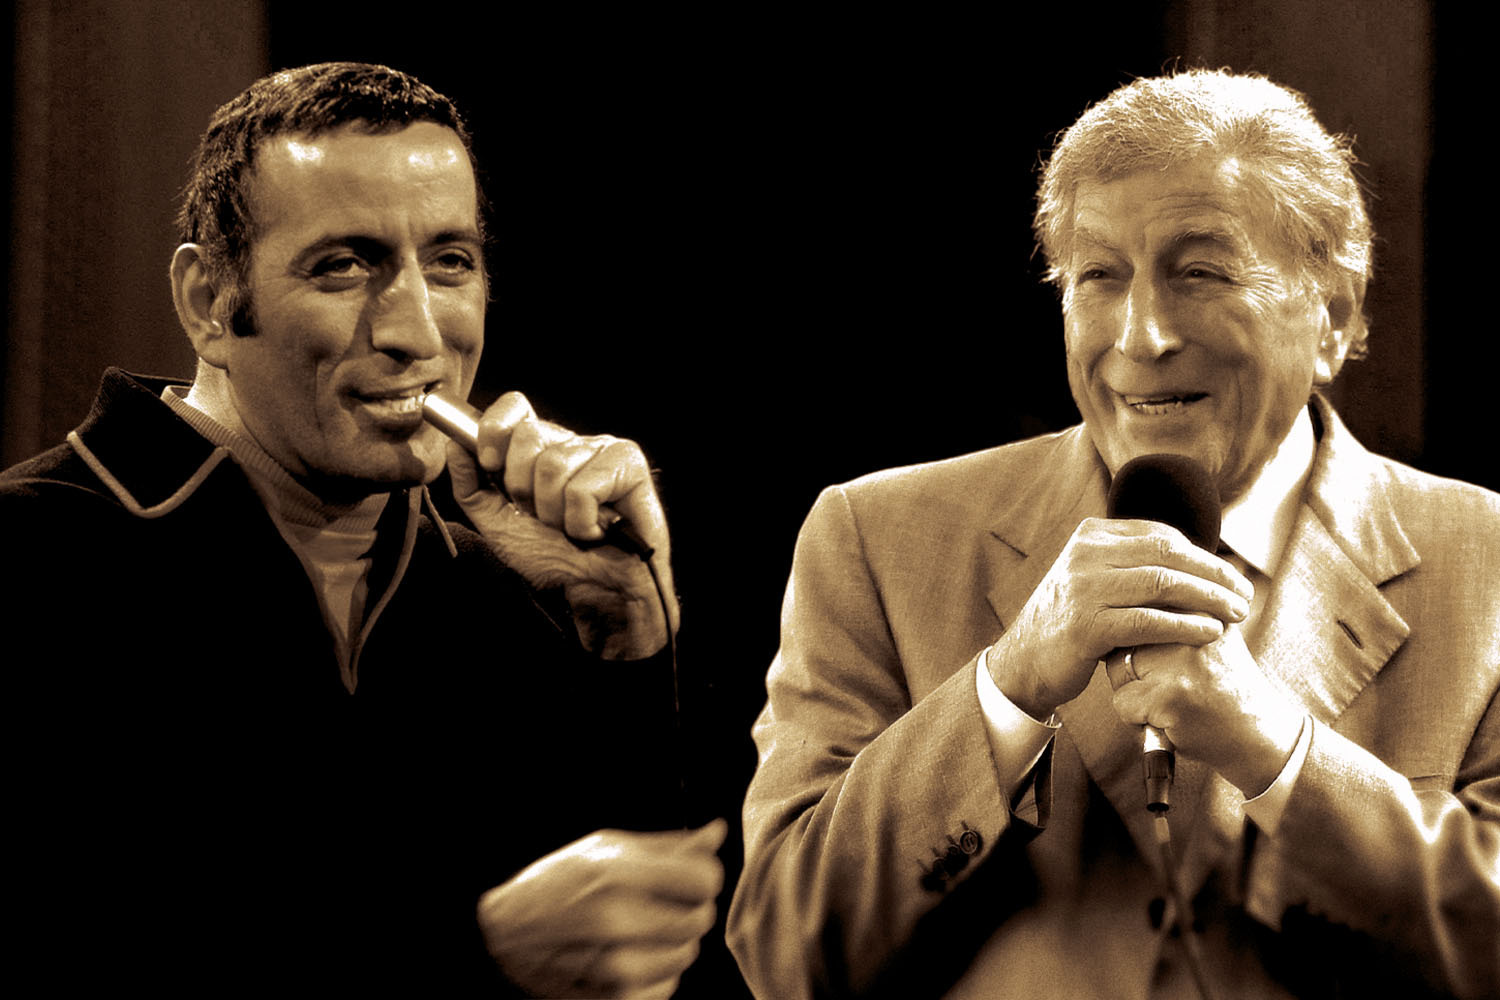 Tony Bennett in his 30s on the left and in his 90s on the right. The legendary crooner recently retired from performing and released his last album, Love for Sale, with Lady Gaga.